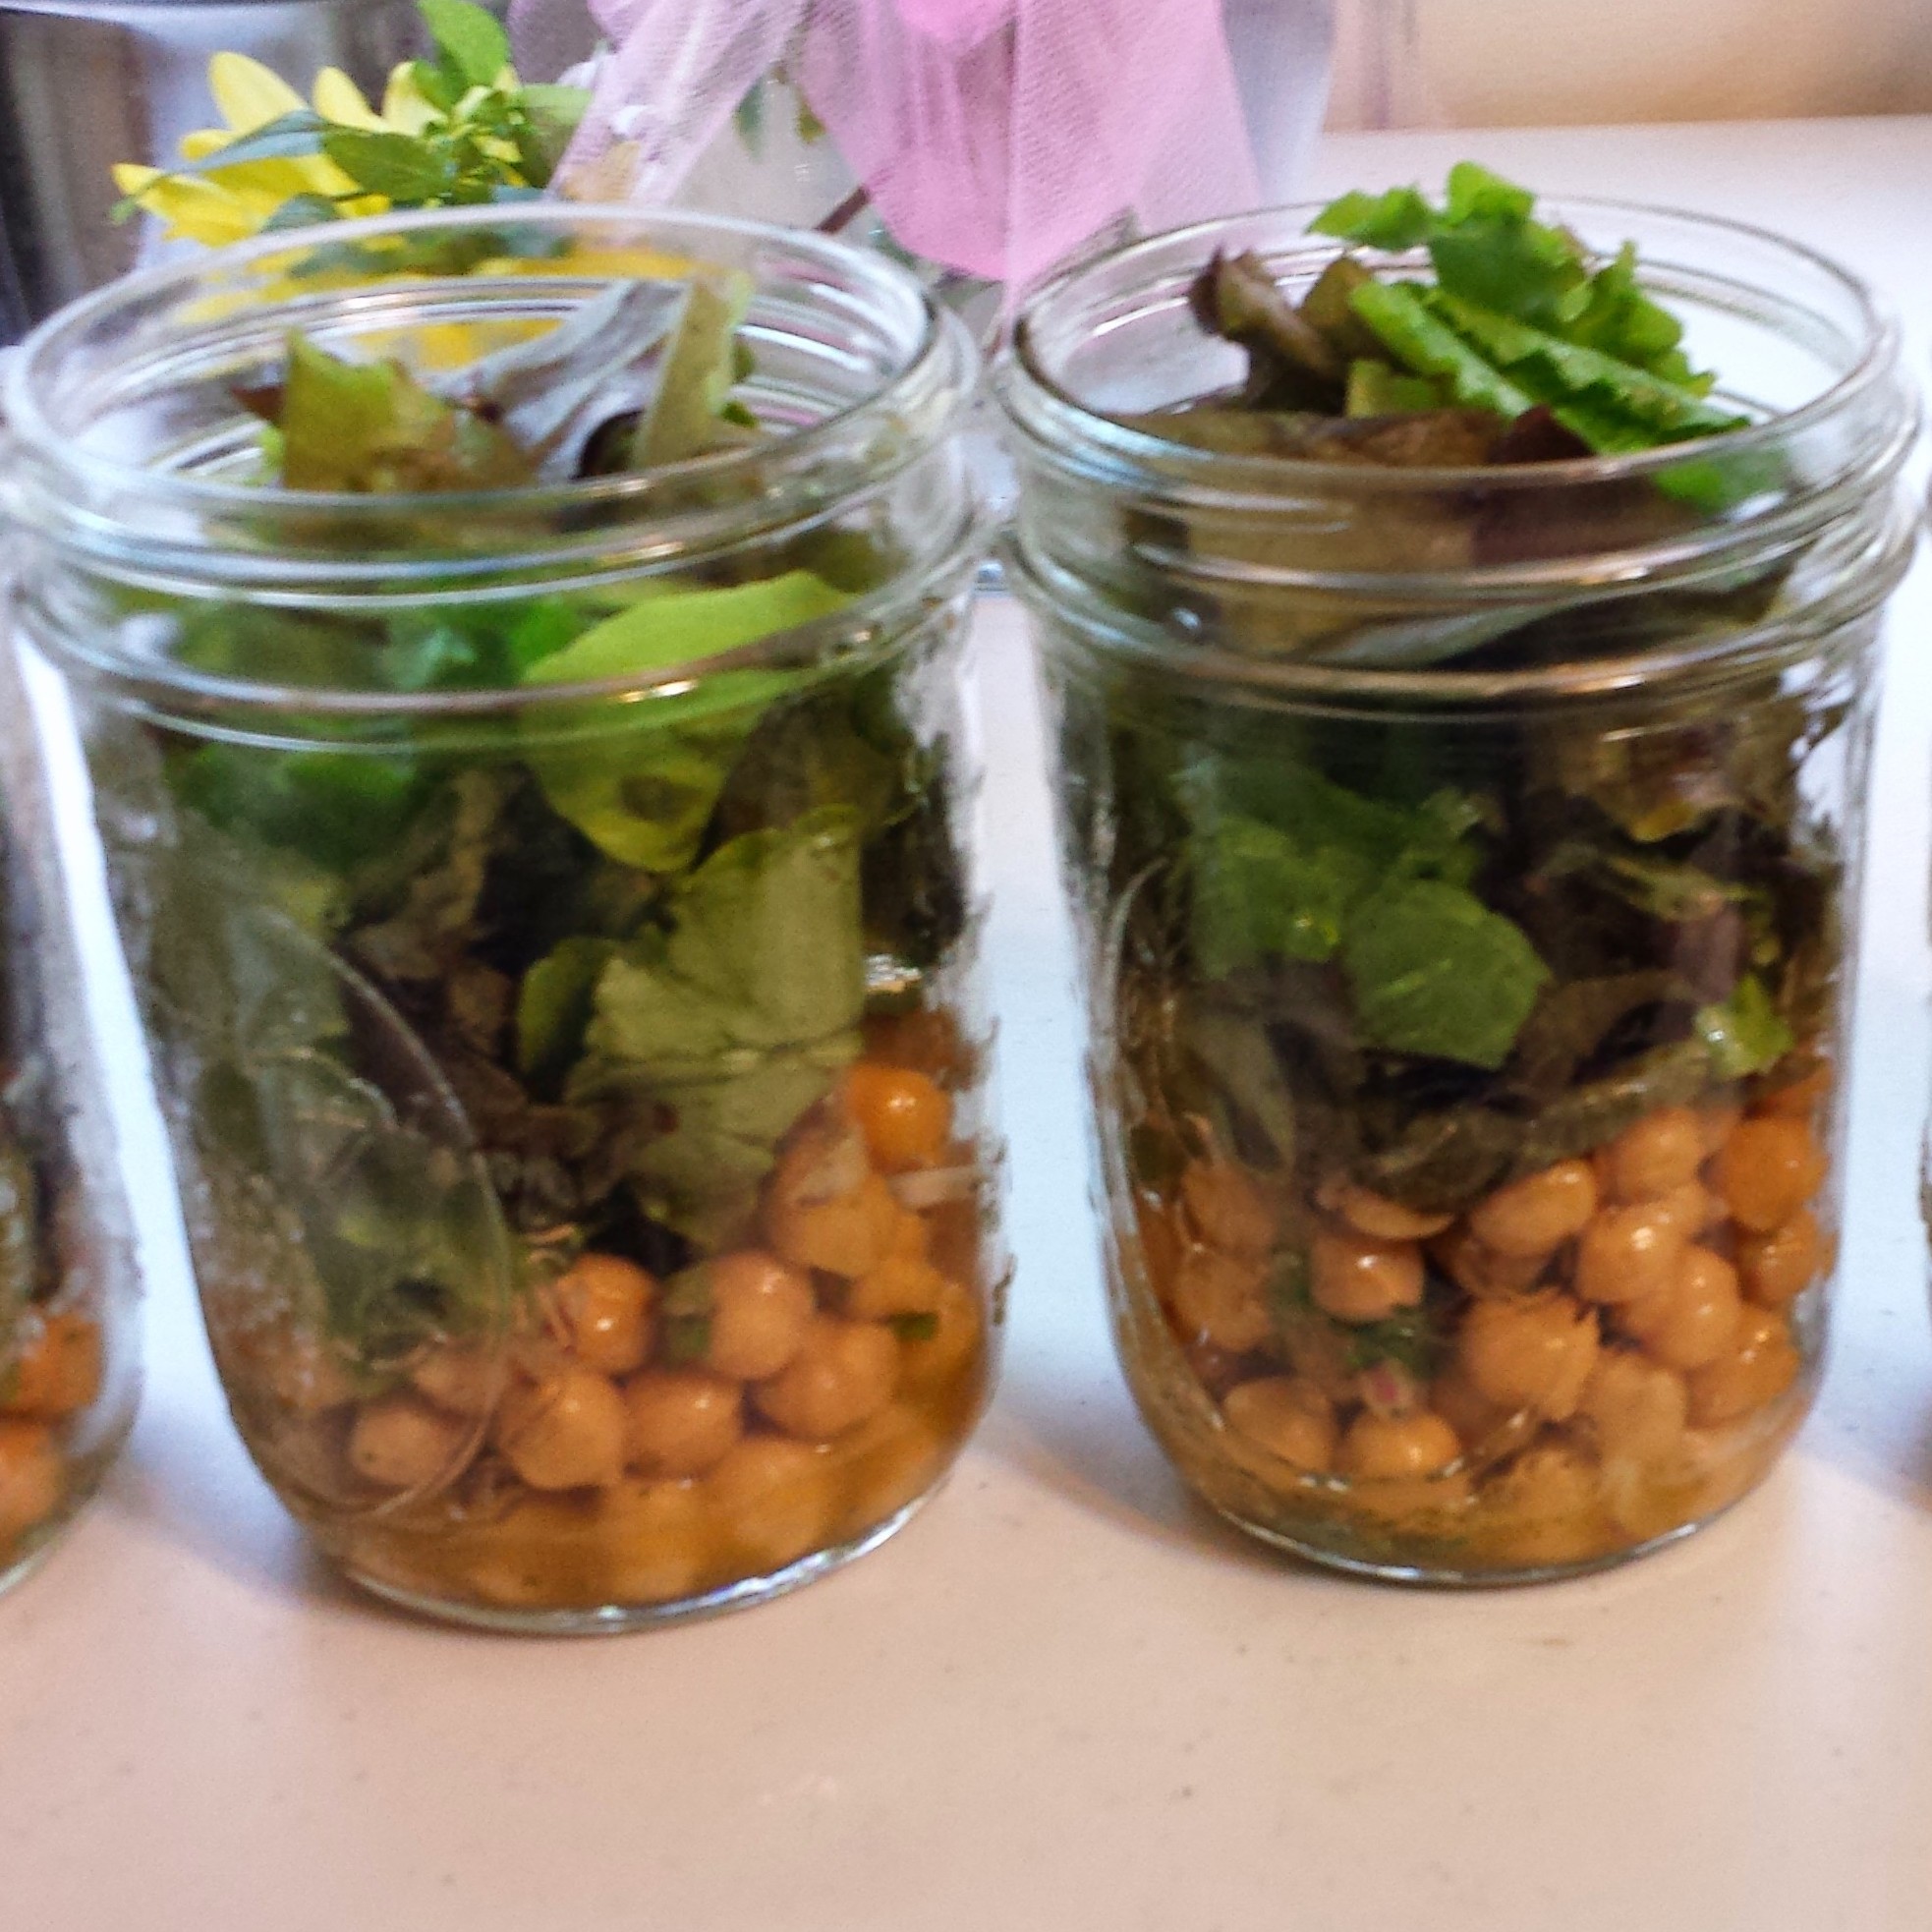 Kale Salad with Chickpeas in a Jar image